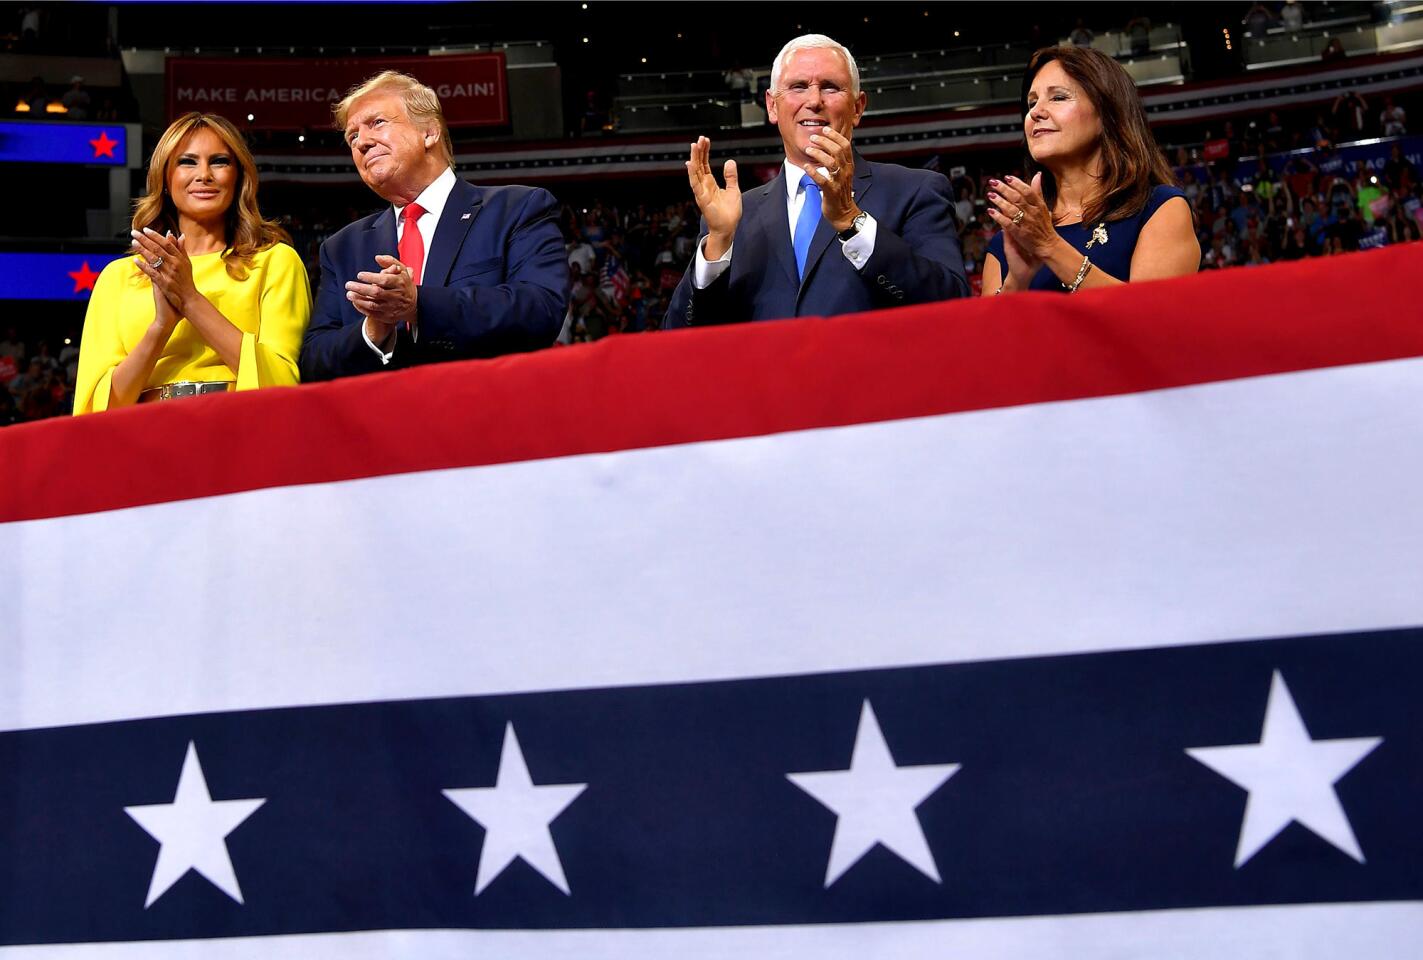 First Lady Melania Trump, from left, President Trump, Vice President Mike Pence and Karen Pence at the launch of the Trump 2020 campaign at the Amway Center in Orlando, Fla., on Tuesday.